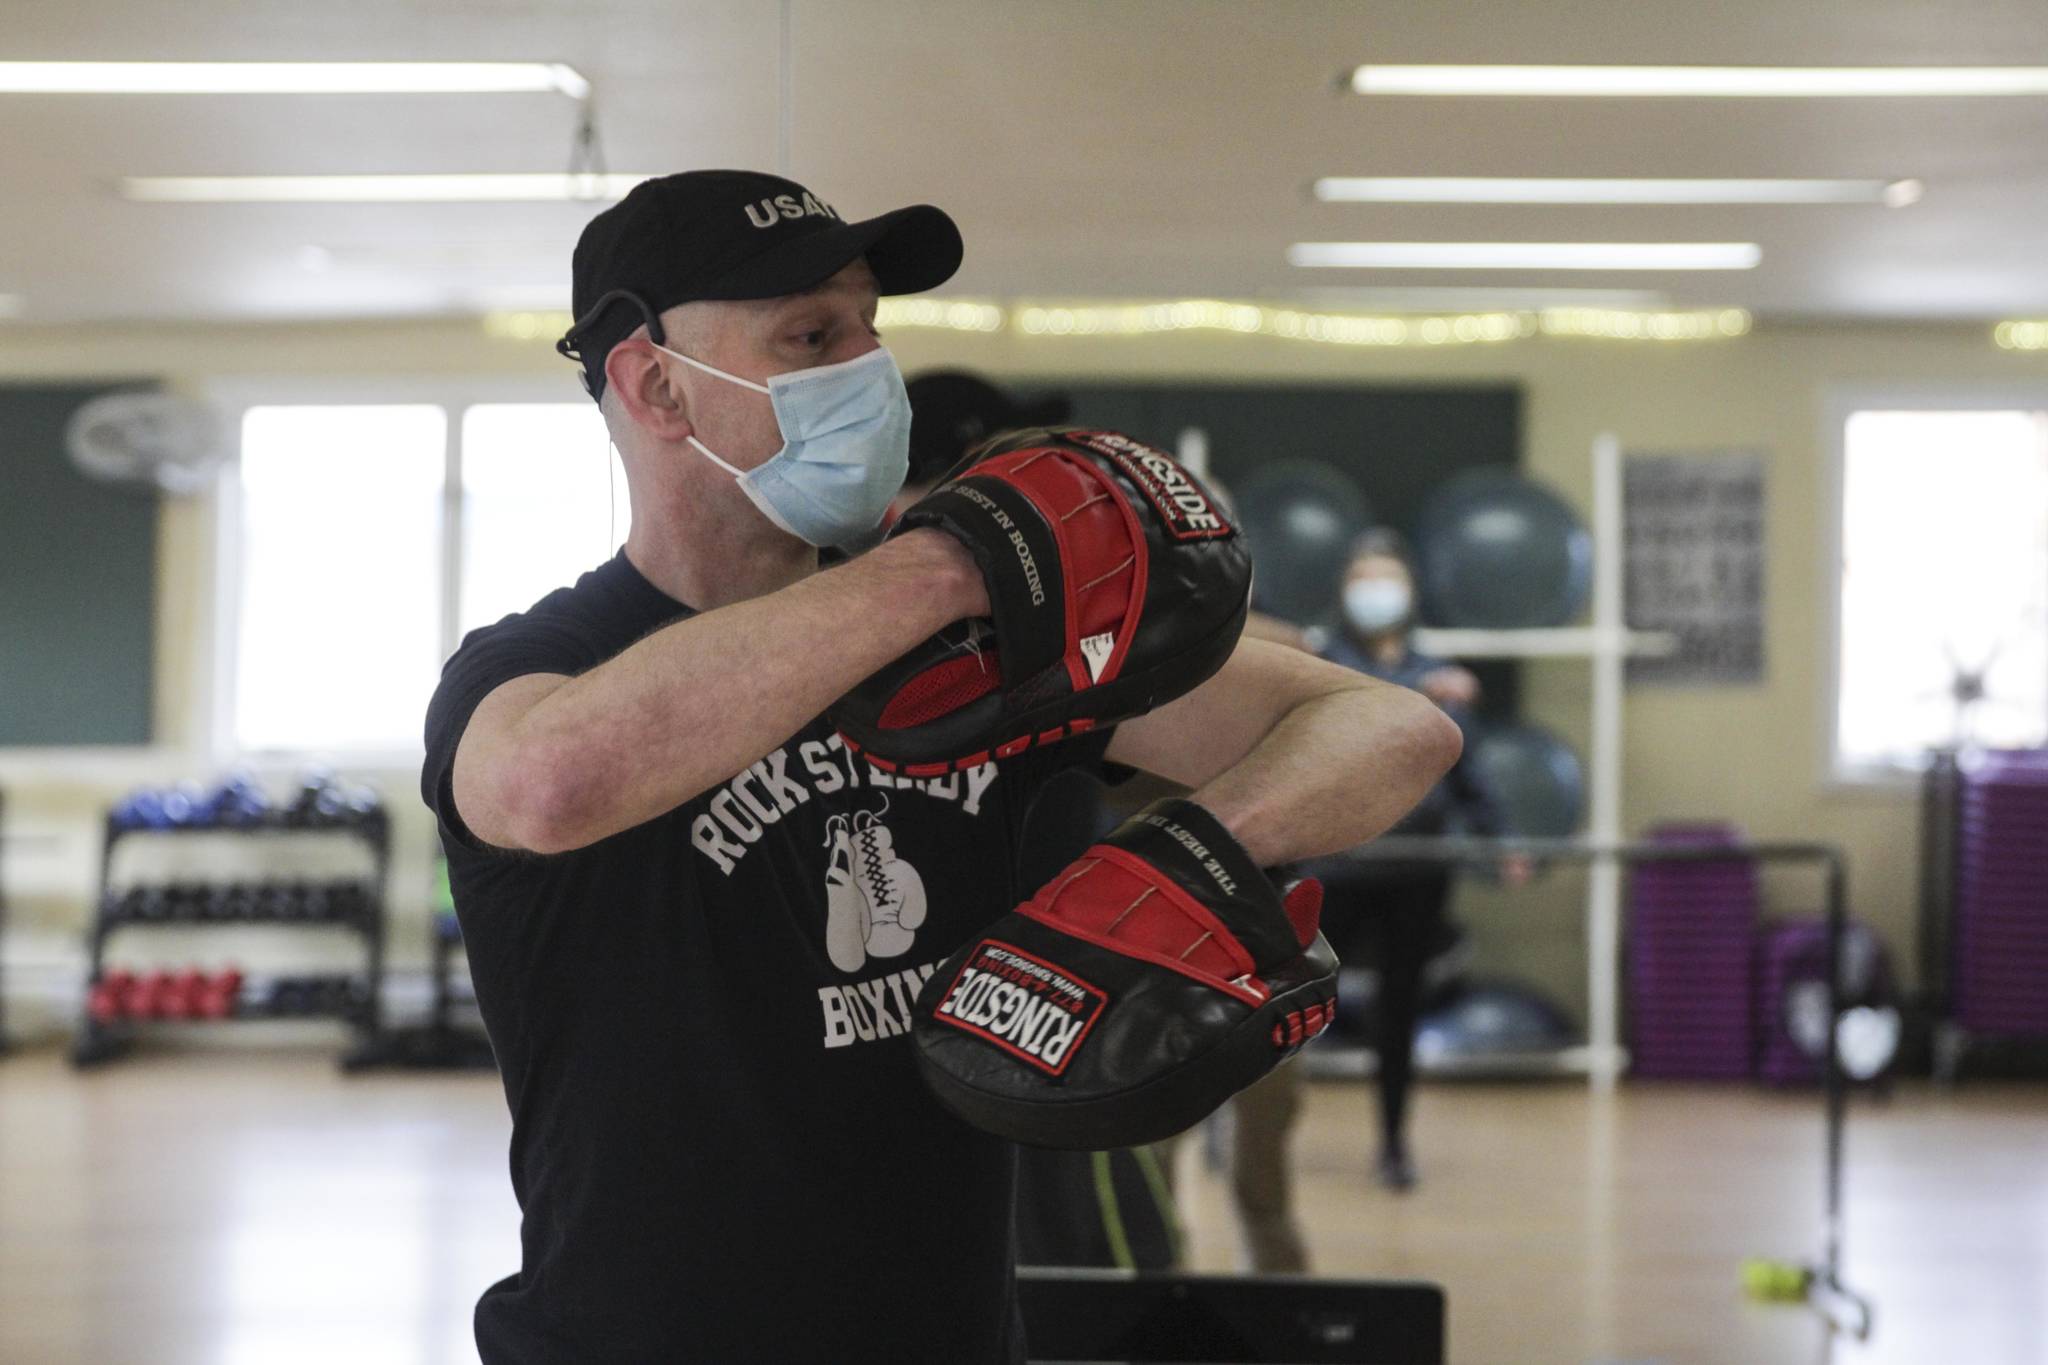 Alec Nevalainen leads a boxing class designed to help fight back against the symptoms Parkinson’s disease through a specific regimen at Pavitt Health and Fitness on March. 2, 2021. (Michael S. Lockett / Juneau Empire)